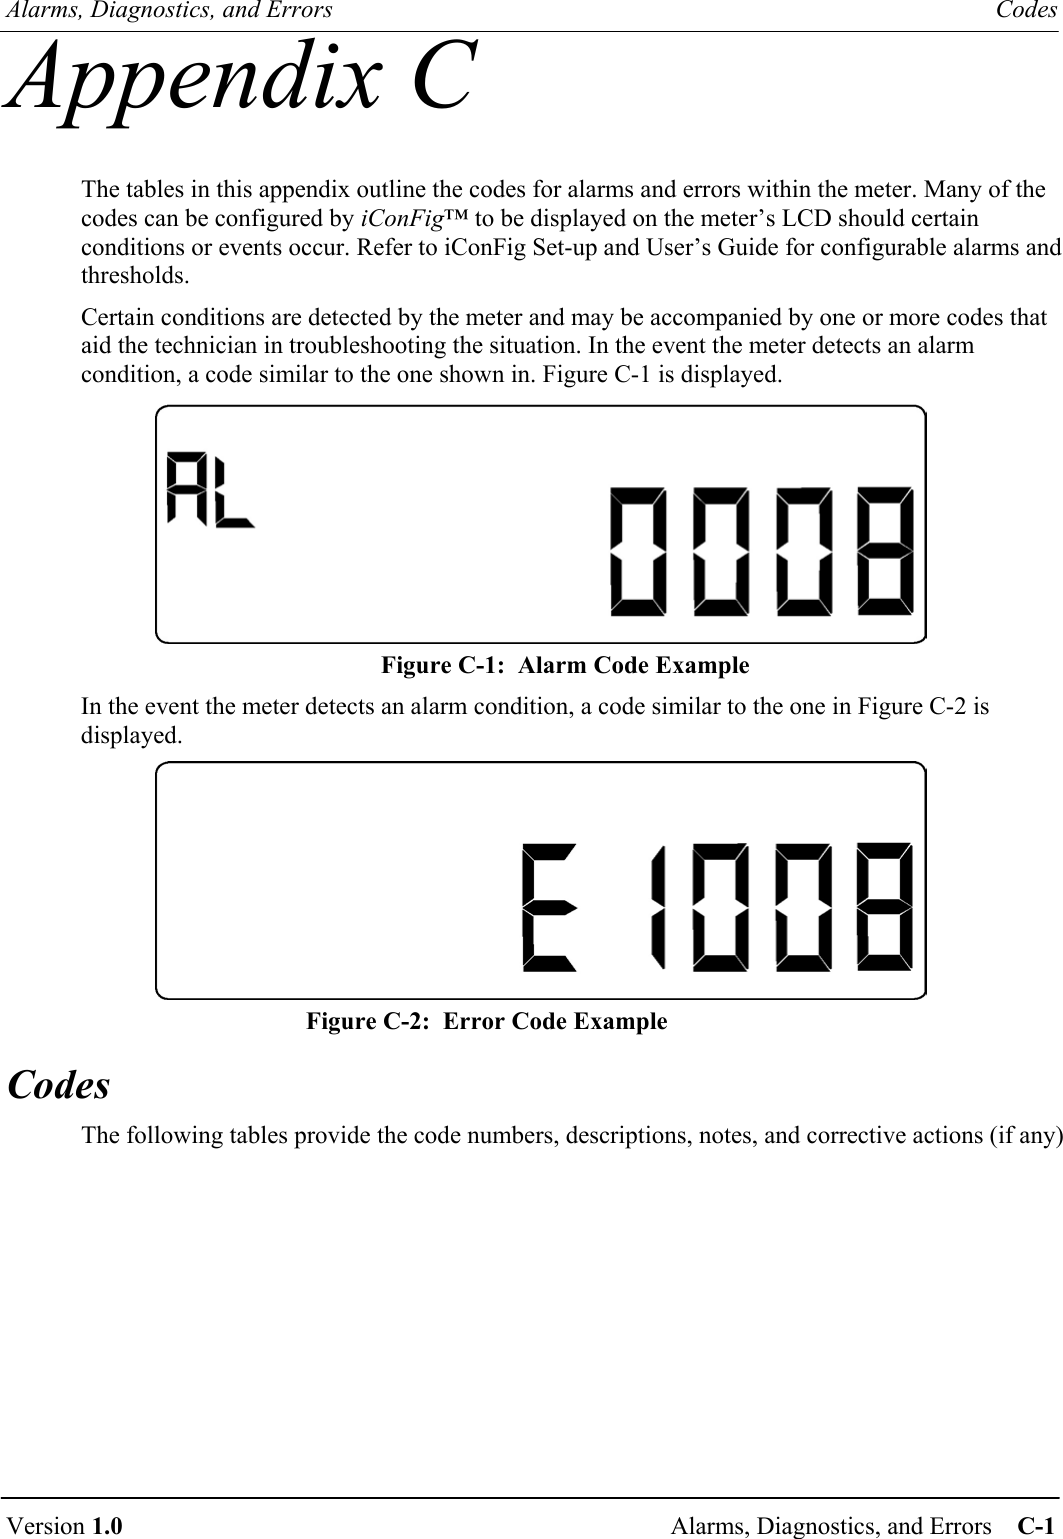 Alarms, Diagnostics, and Errors  Codes  Version 1.0  Alarms, Diagnostics, and Errors    C-1  Appendix C The tables in this appendix outline the codes for alarms and errors within the meter. Many of the codes can be configured by iConFig™ to be displayed on the meter’s LCD should certain conditions or events occur. Refer to iConFig Set-up and User’s Guide for configurable alarms and thresholds. Certain conditions are detected by the meter and may be accompanied by one or more codes that aid the technician in troubleshooting the situation. In the event the meter detects an alarm condition, a code similar to the one shown in. Figure C-1 is displayed.  Figure C-1:  Alarm Code Example In the event the meter detects an alarm condition, a code similar to the one in Figure C-2 is displayed.  Figure C-2:  Error Code Example Codes The following tables provide the code numbers, descriptions, notes, and corrective actions (if any) 